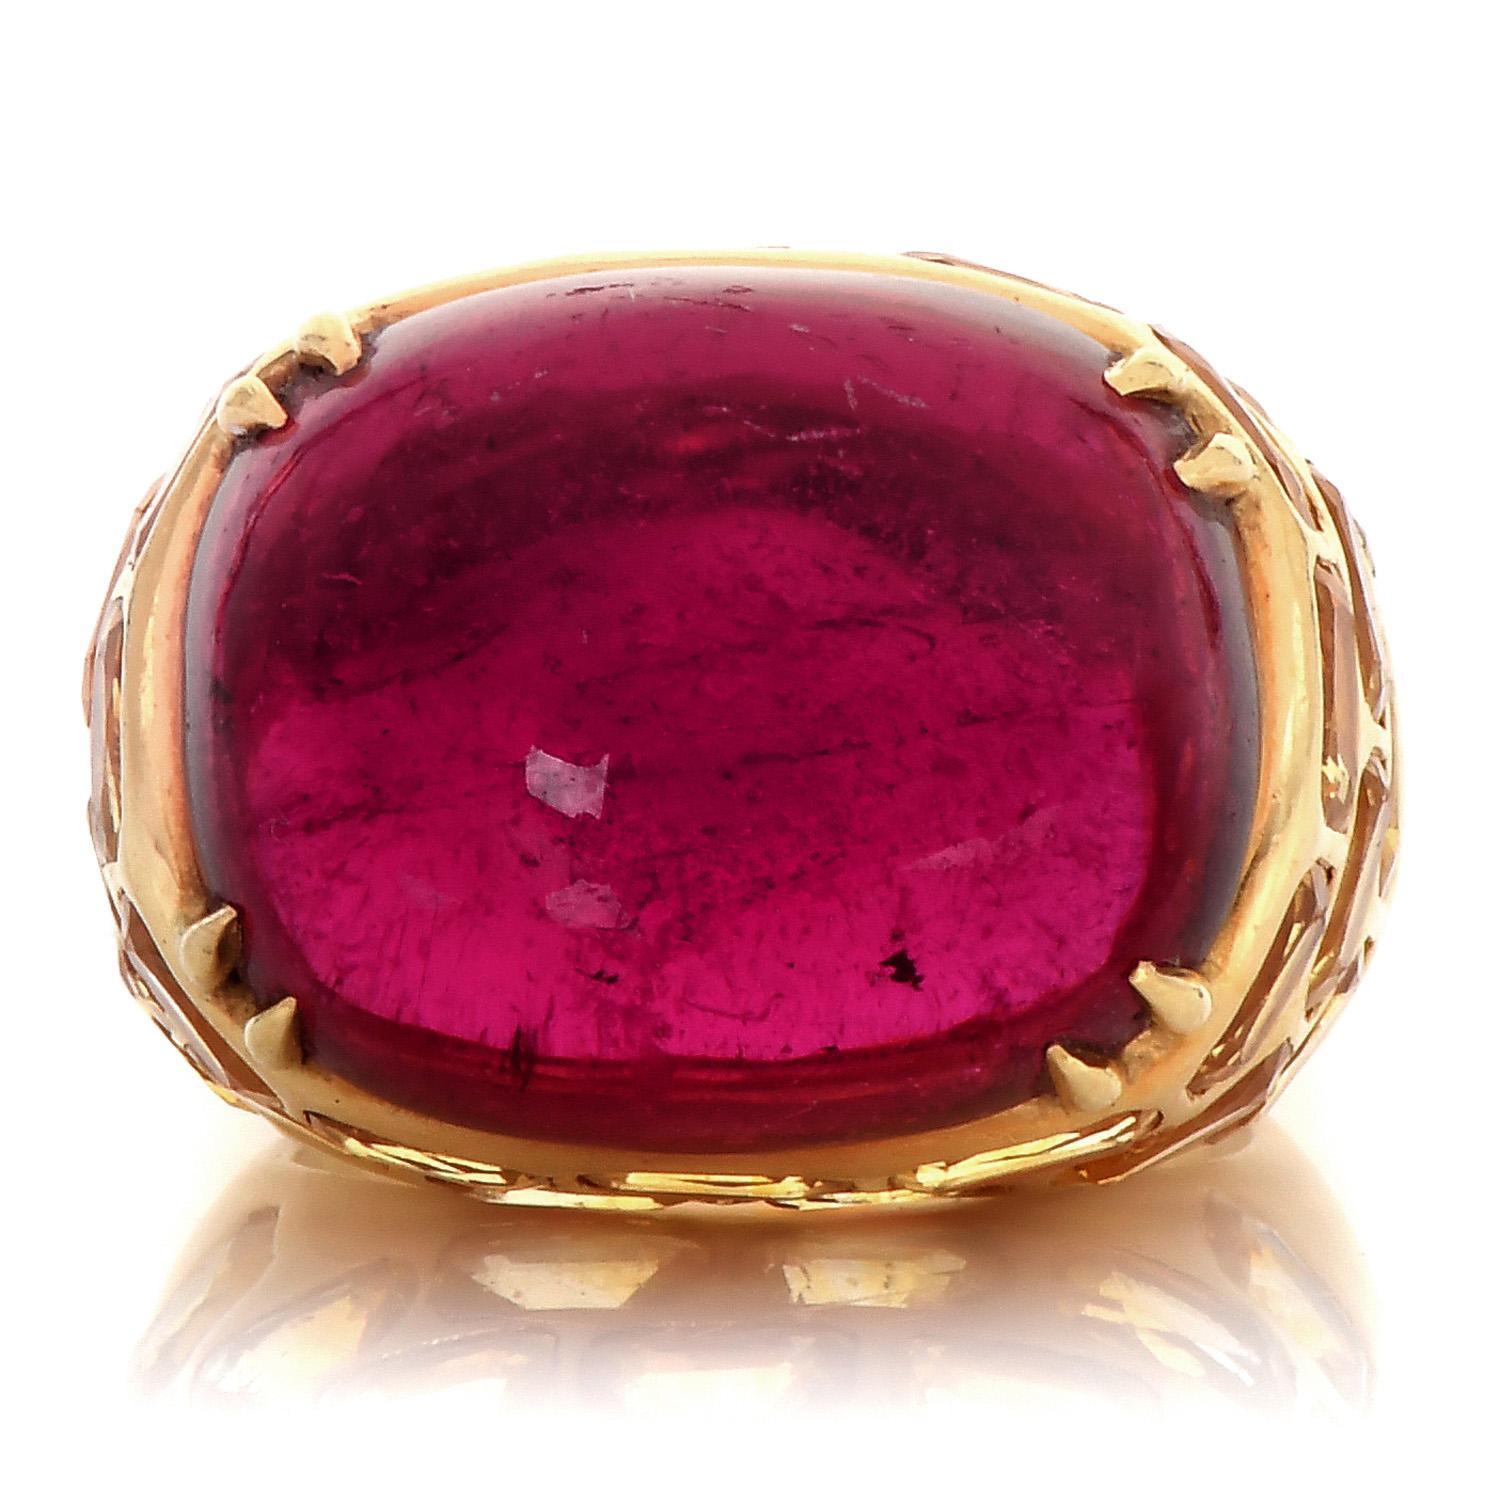 This high-quality Vintage Retro ring features a massive Rubellite tourmaline in a high-set cocktail ring. 

Inspired by a brick style, this piece is crafted in solid 18K Yellow Gold. Signed Lilli, a famous jewelry designer in Florida in the